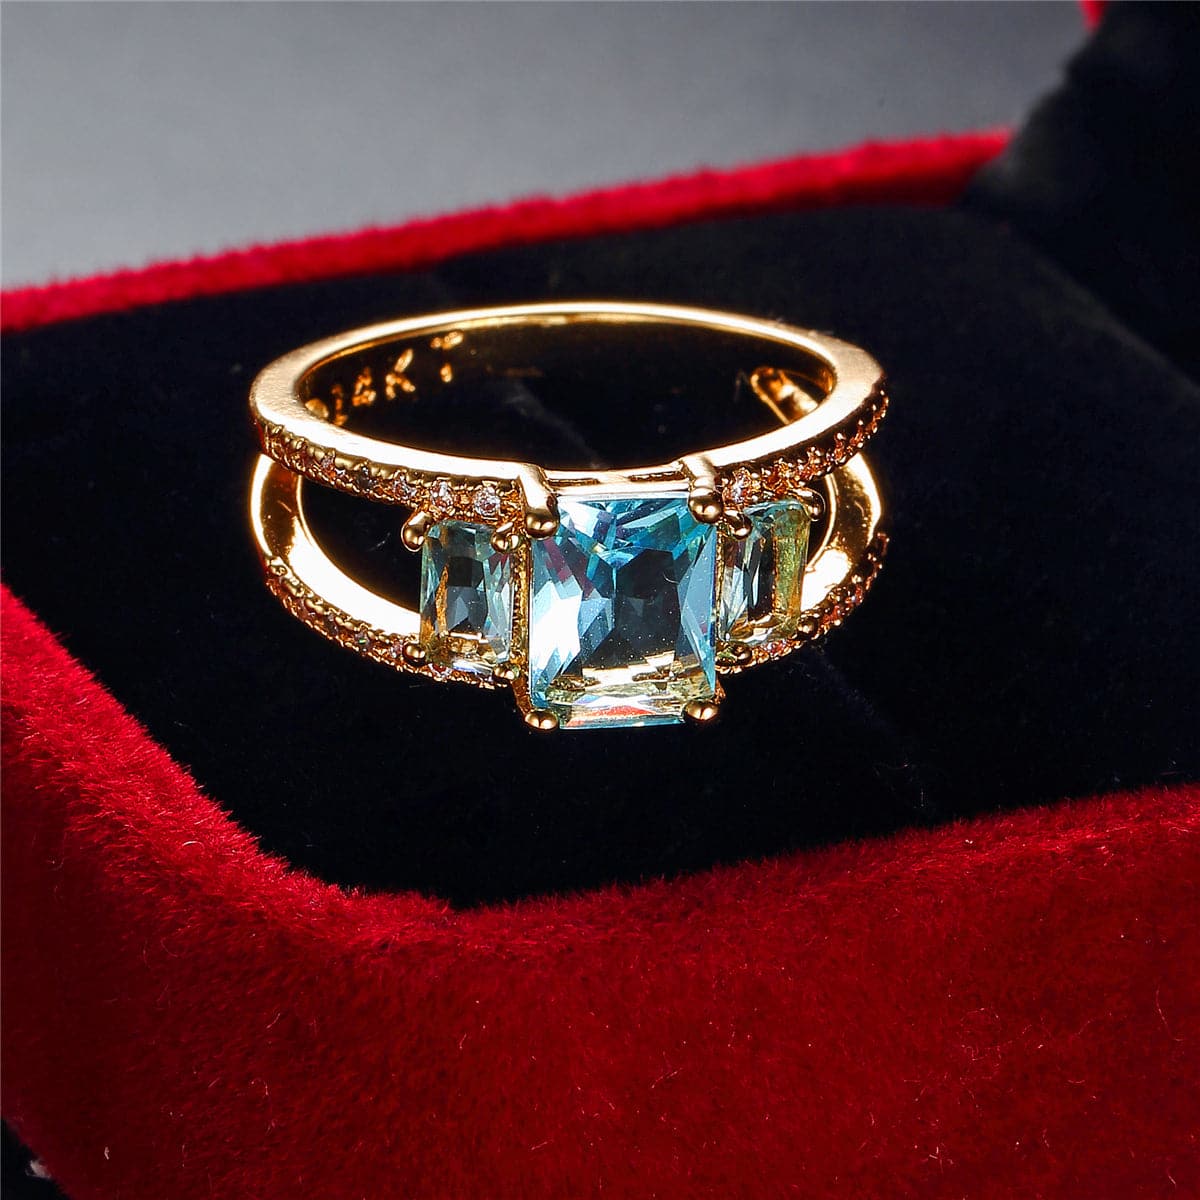 Sea Blue Crystal & Gold-Plated Double-Band Ring